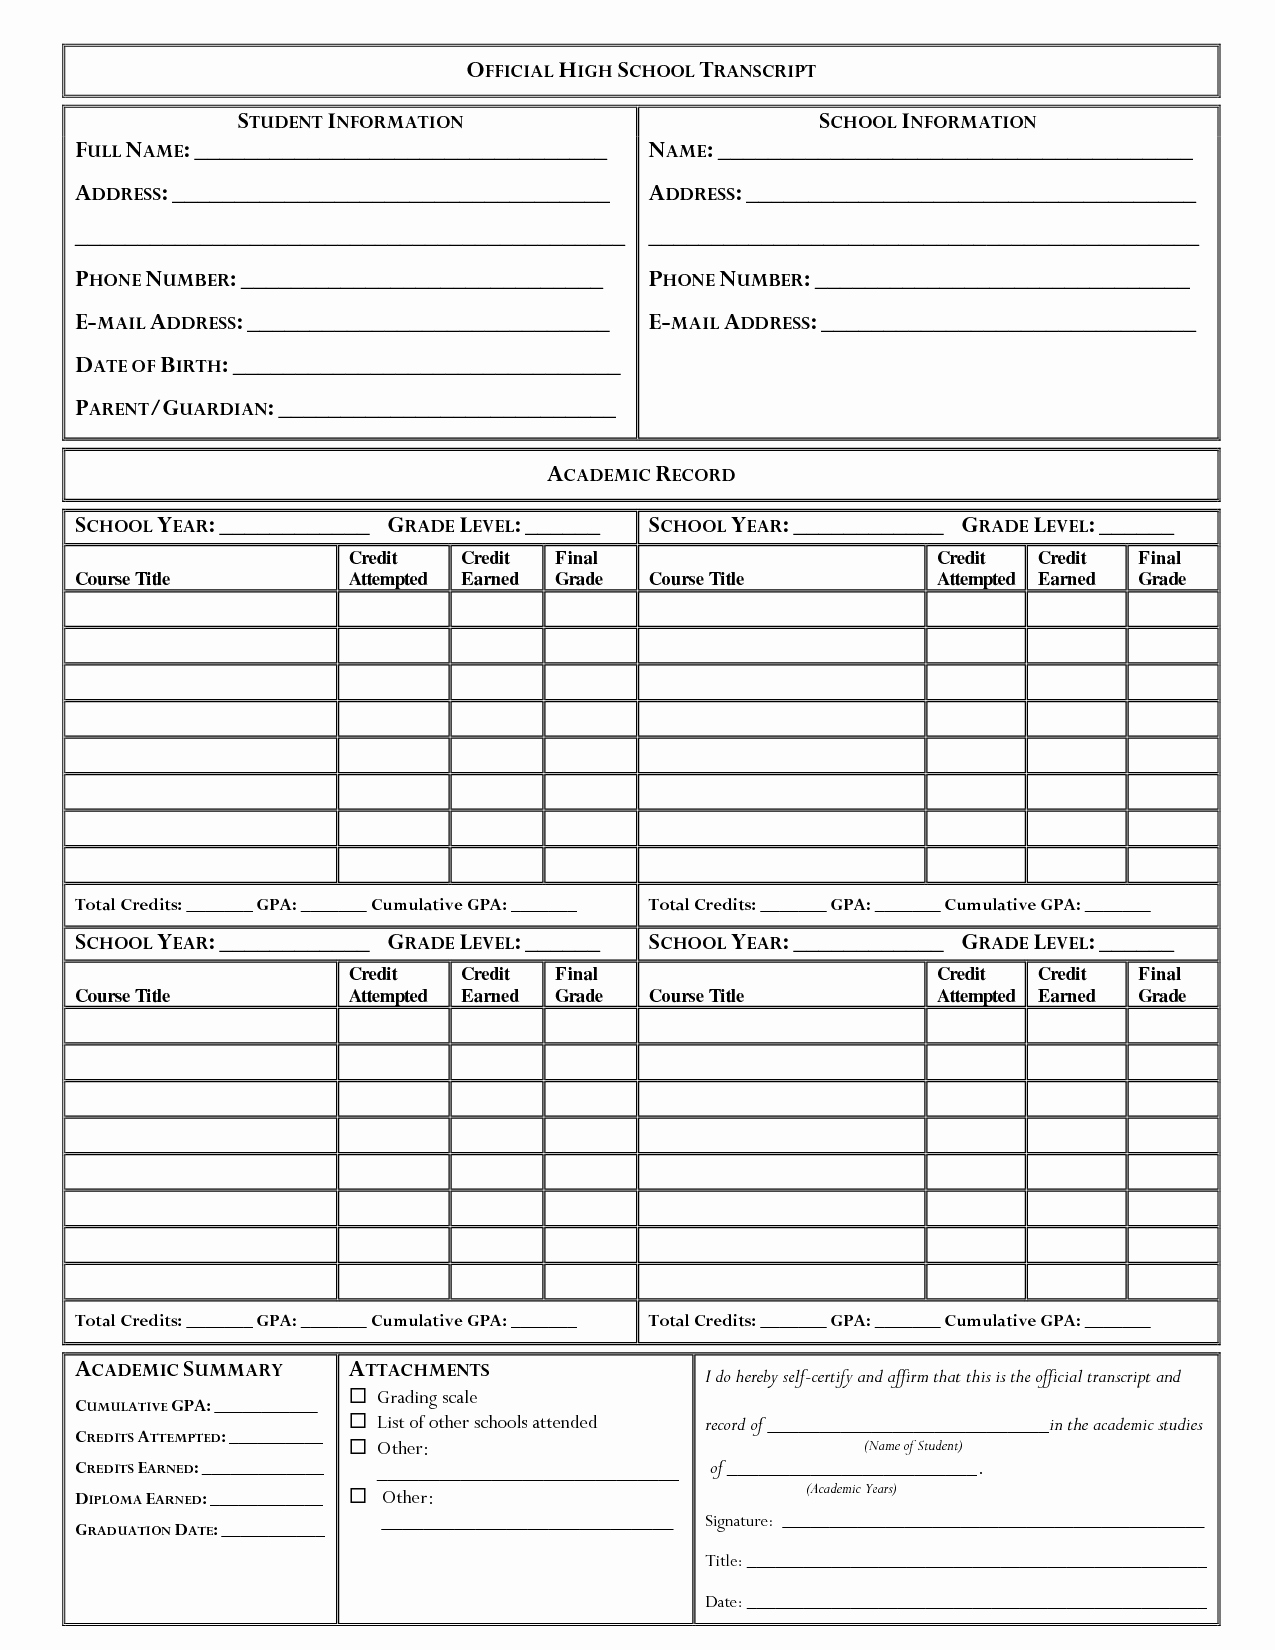 Student Information Card Template Fresh Official High School Transcript Student Information Full